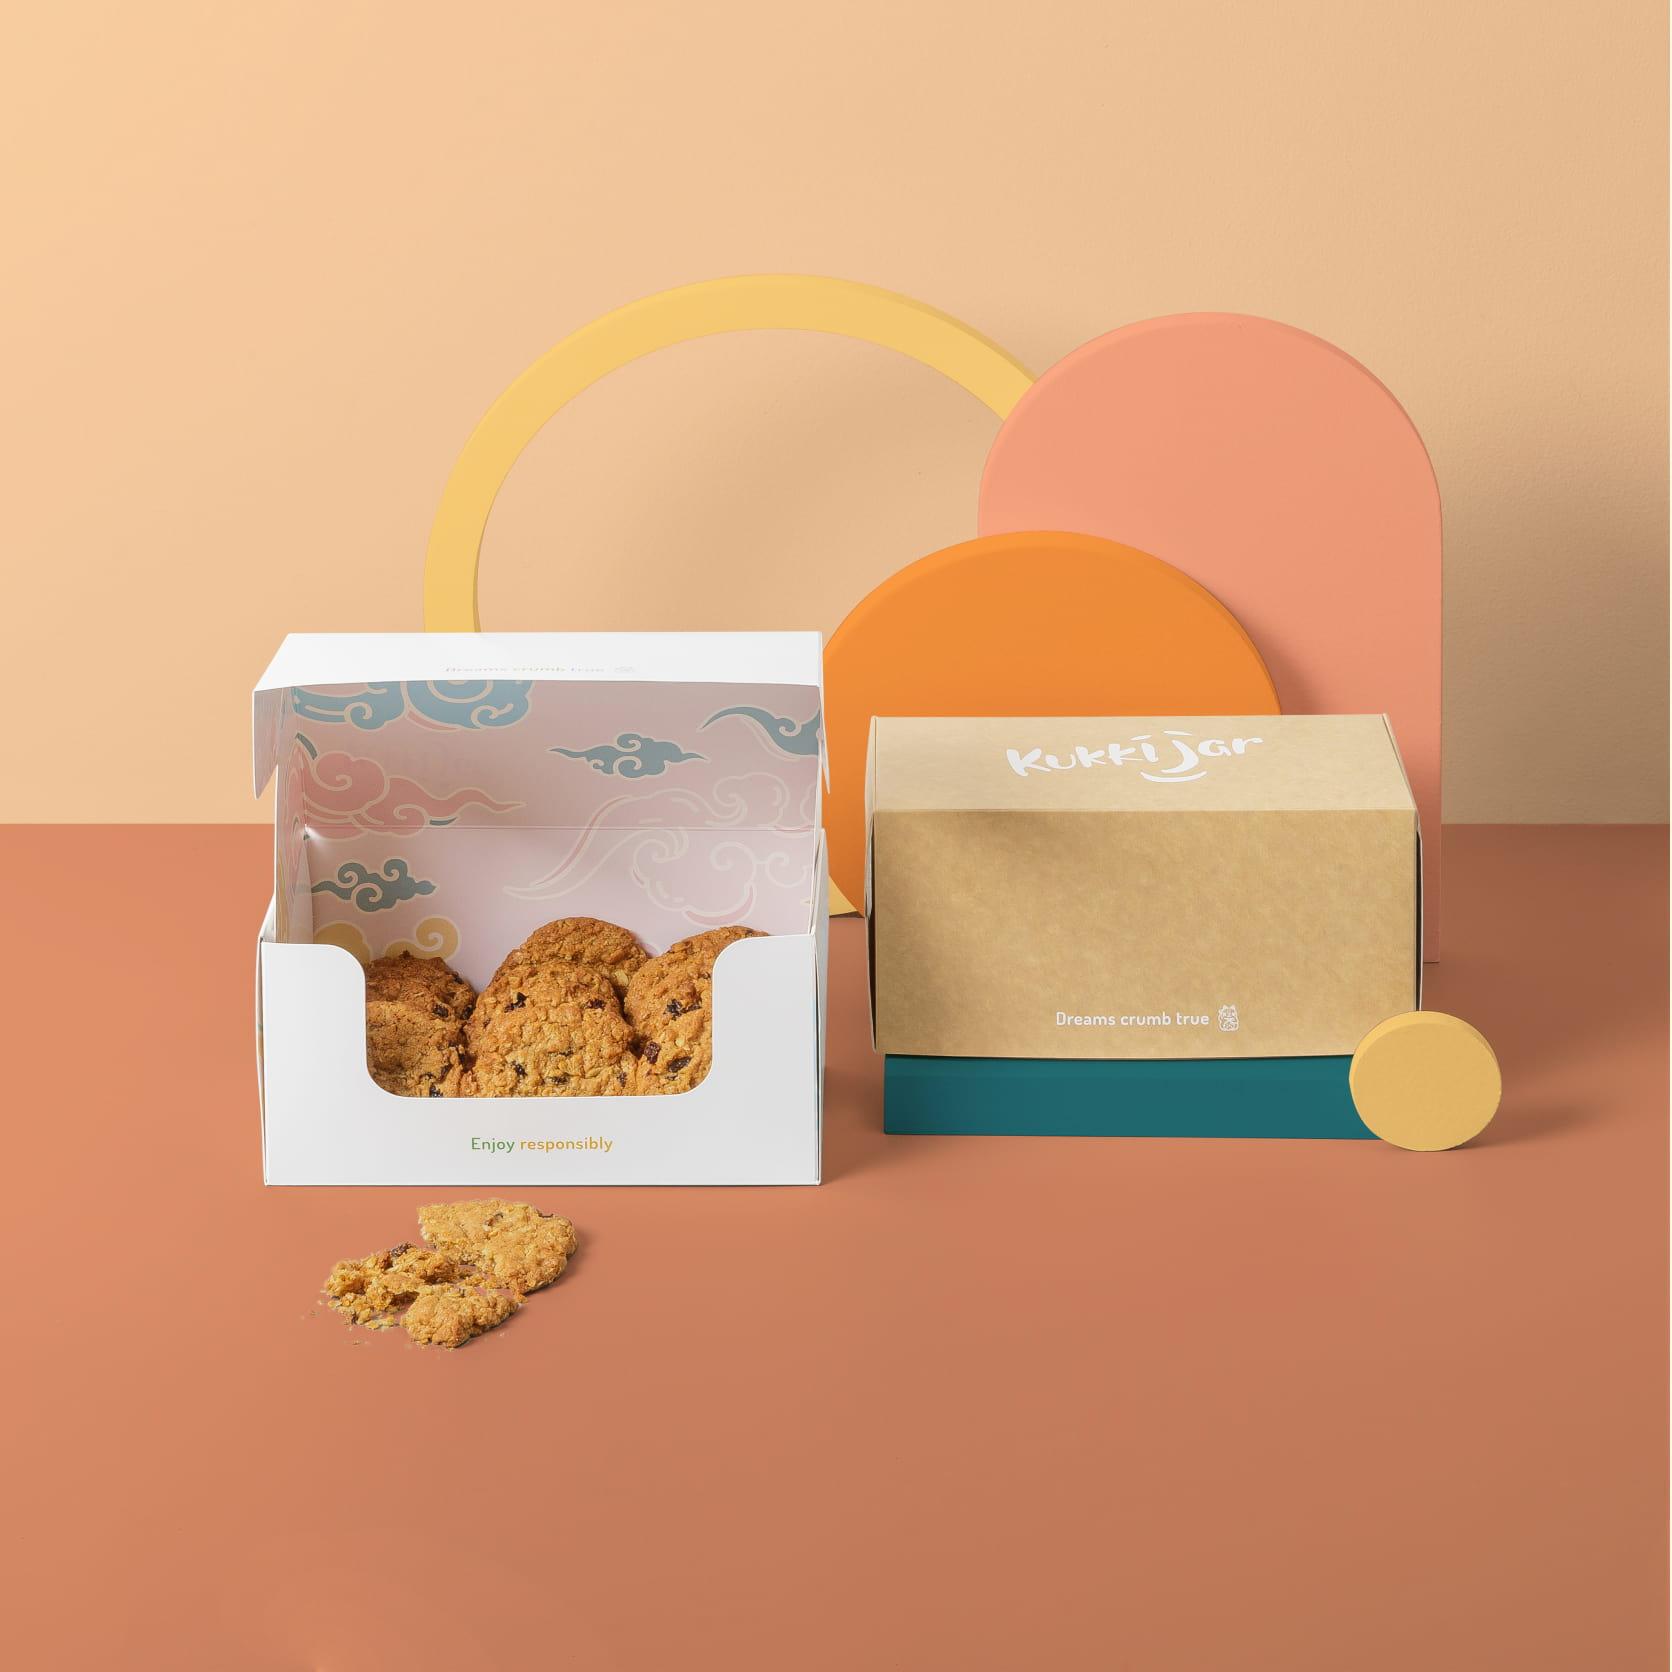 Folding carton food packaging box with cookies